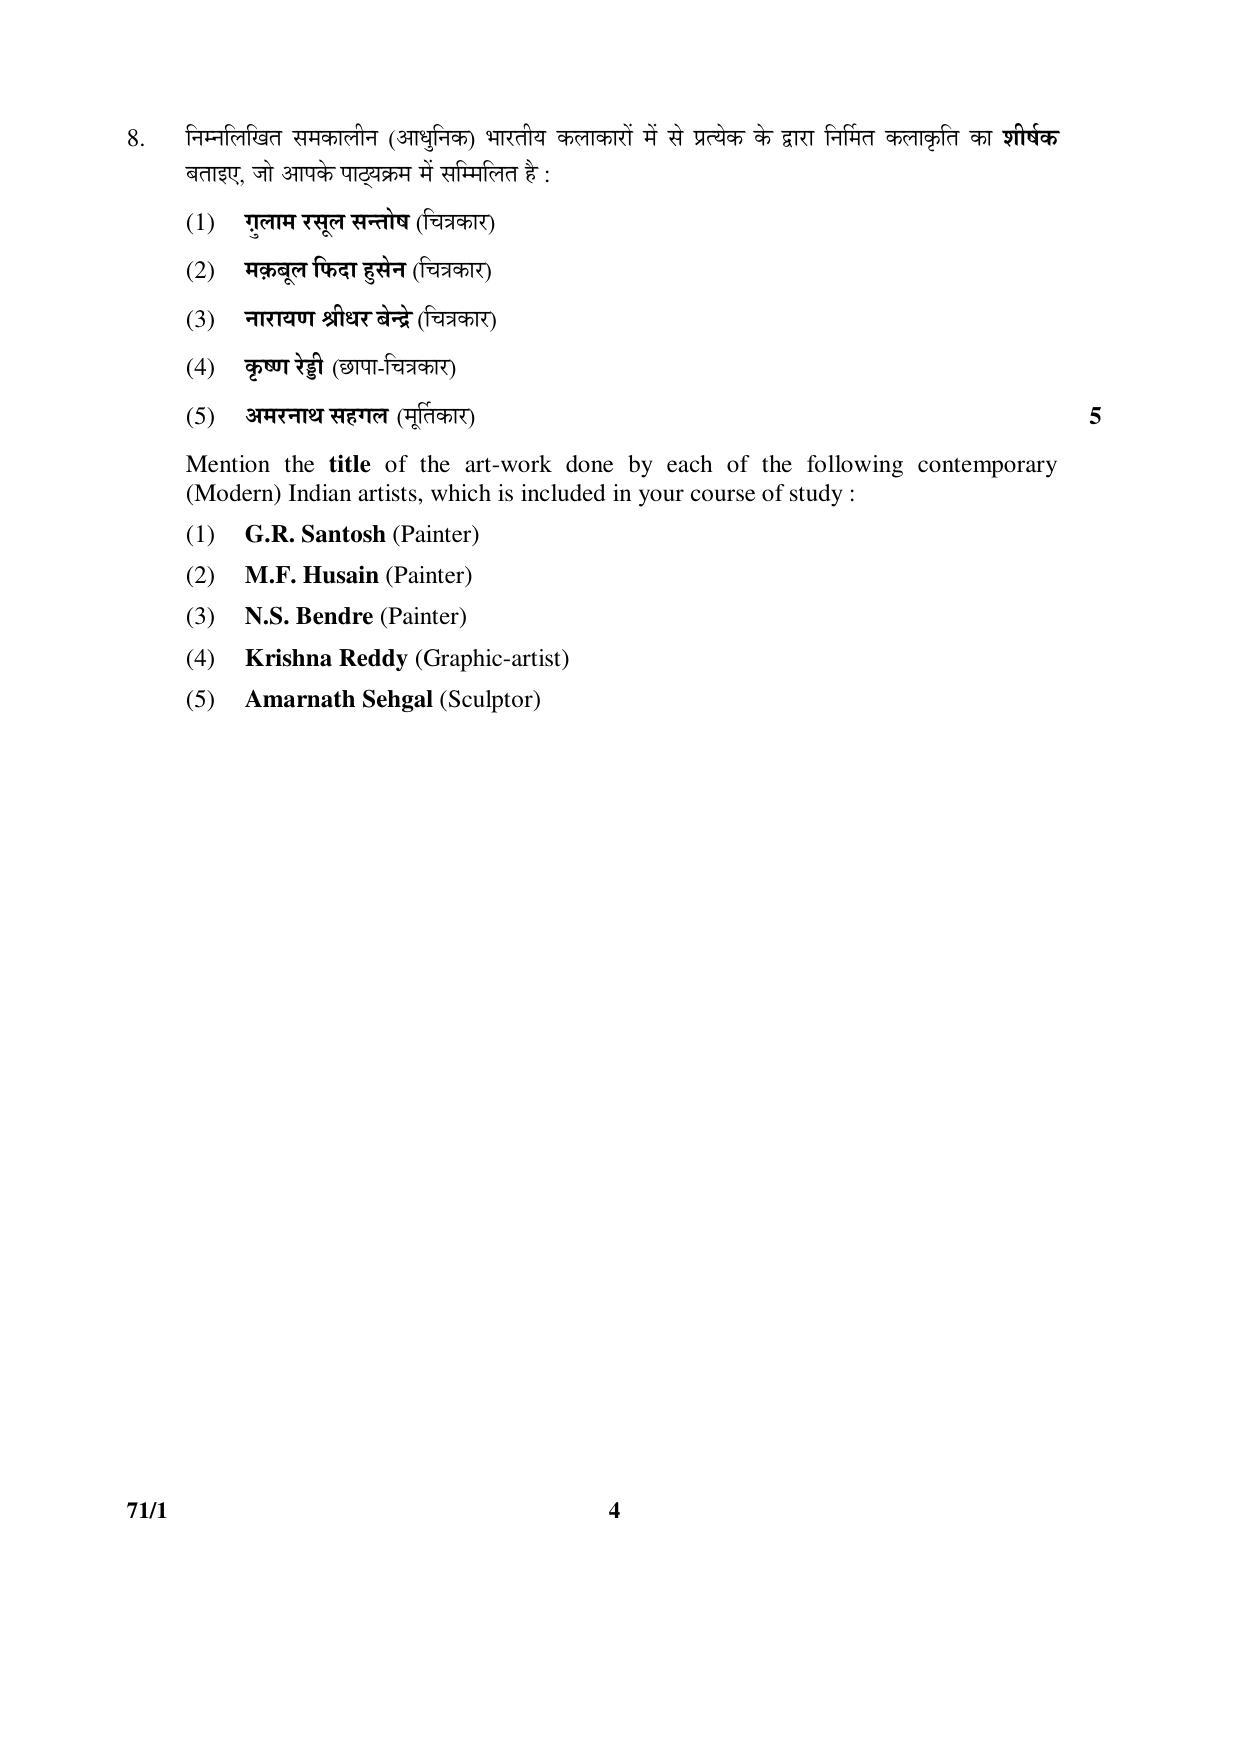 CBSE Class 12 71-1 PAINTING (Theory) 2016 Question Paper - Page 4